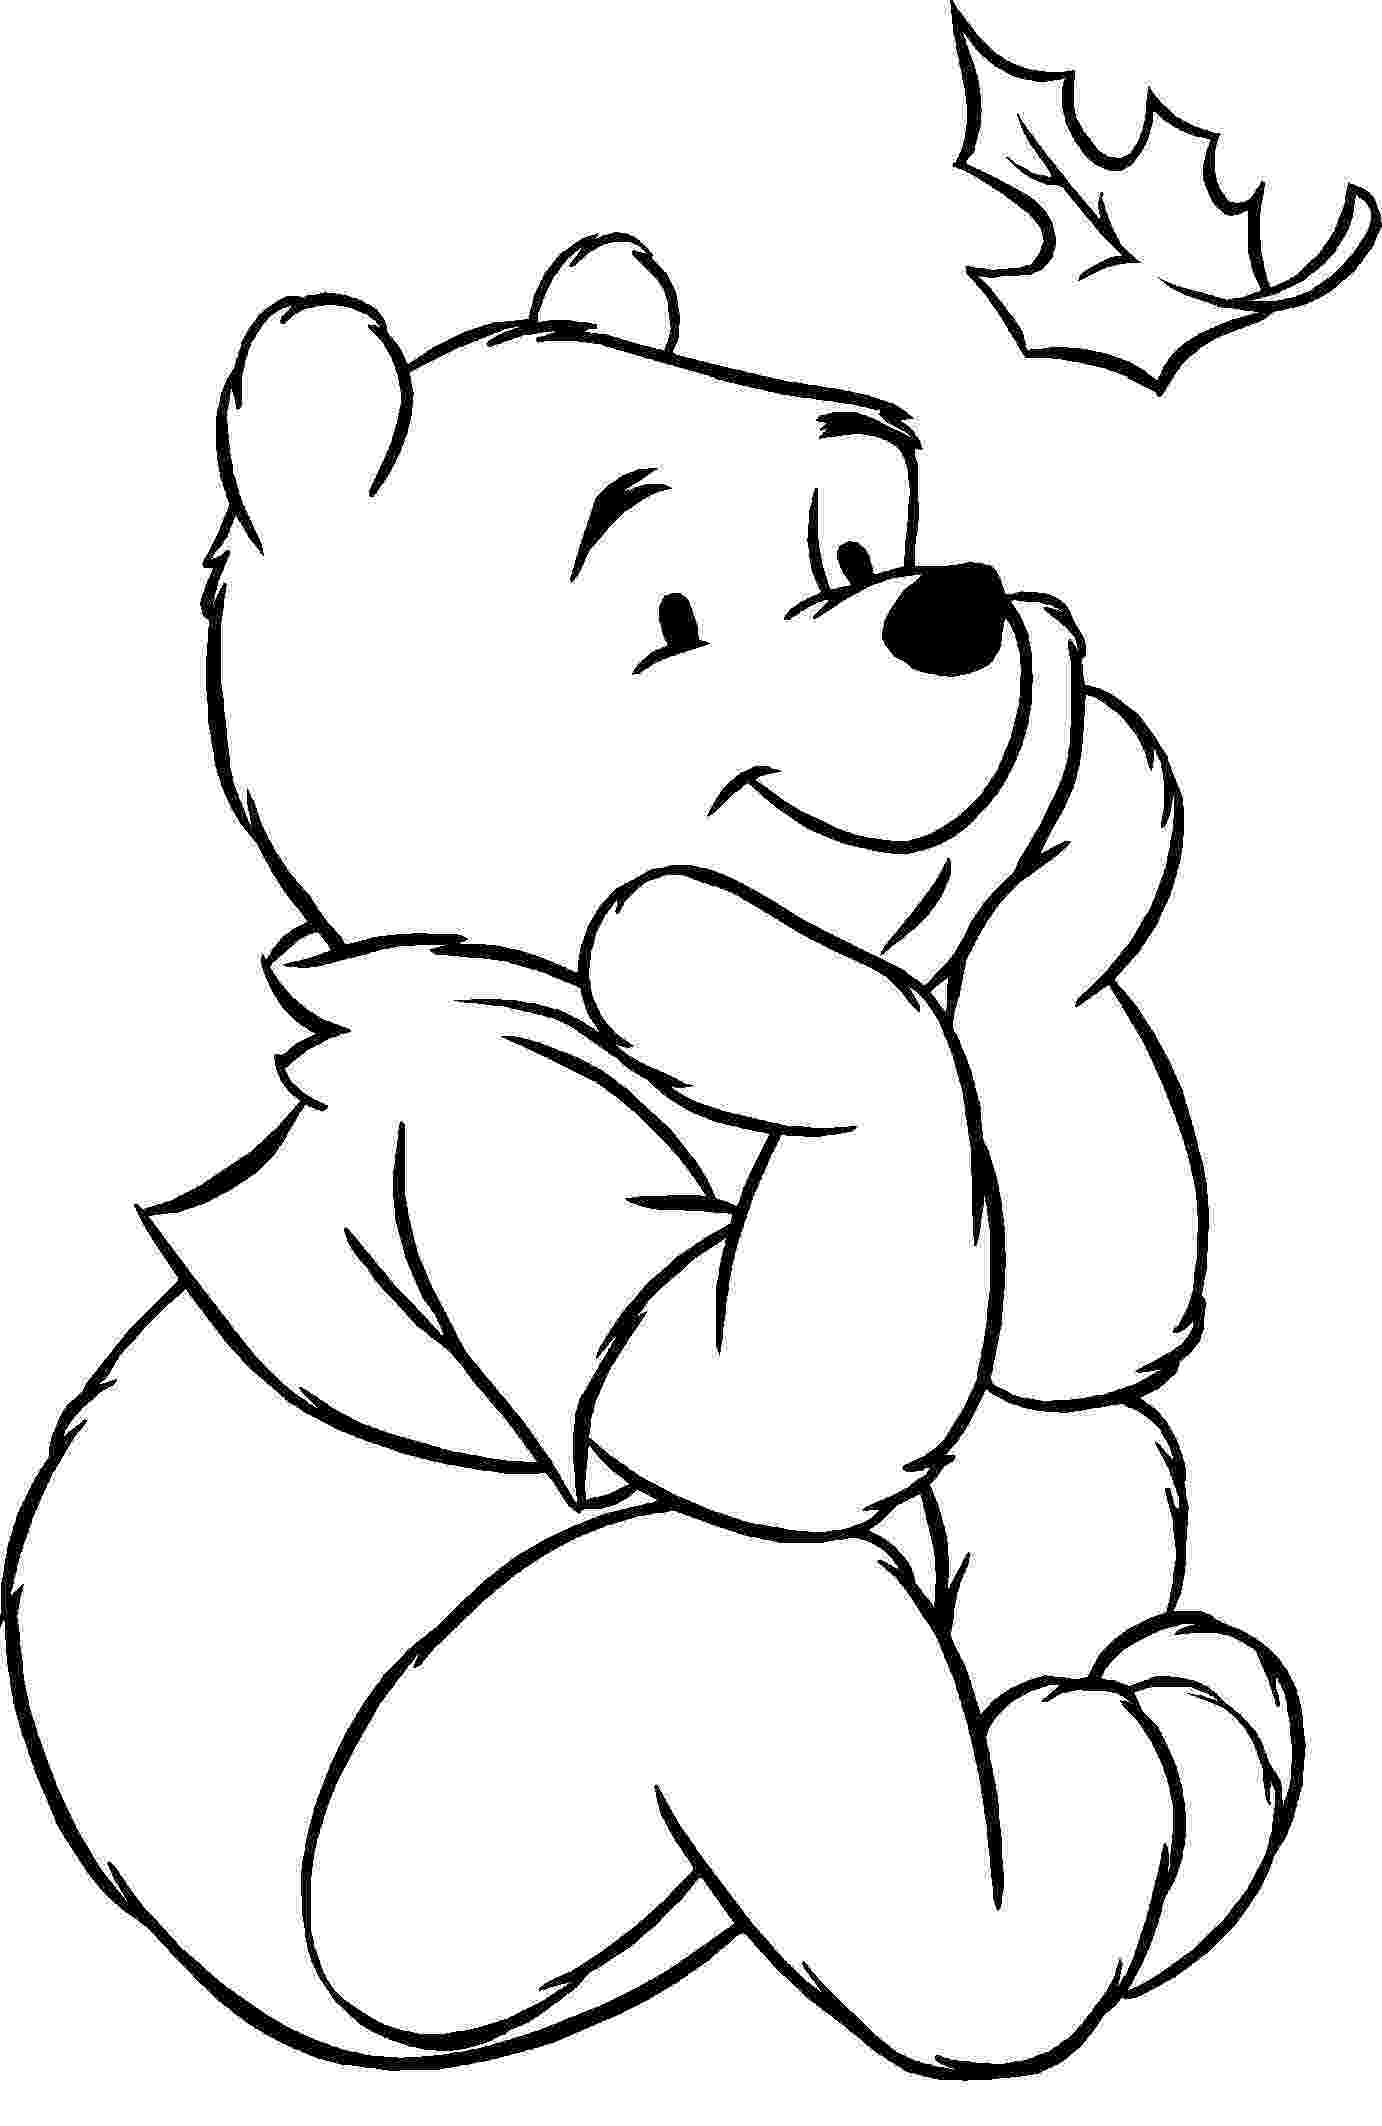 winnie pooh colouring pages free printable winnie the pooh coloring pages for kids pooh winnie pages colouring 